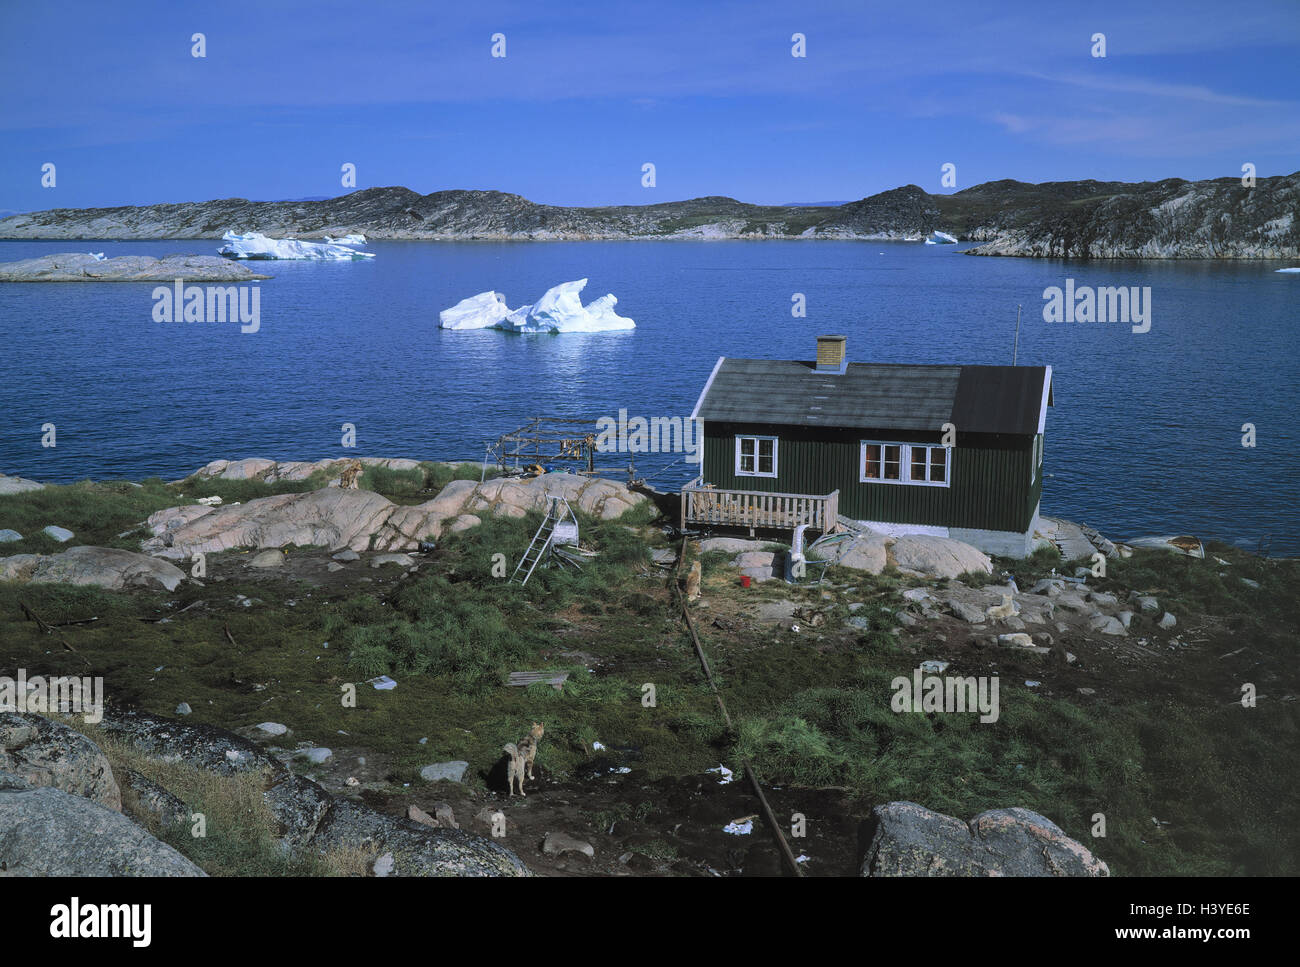 Denmark, Greenland, Jakobshavn house, sea Inuit town, west Greenland, place, view, fishing house, residential house, architectural style, typically, coast, Atlantic, the Atlantic, icebergs, floes, Stock Photo